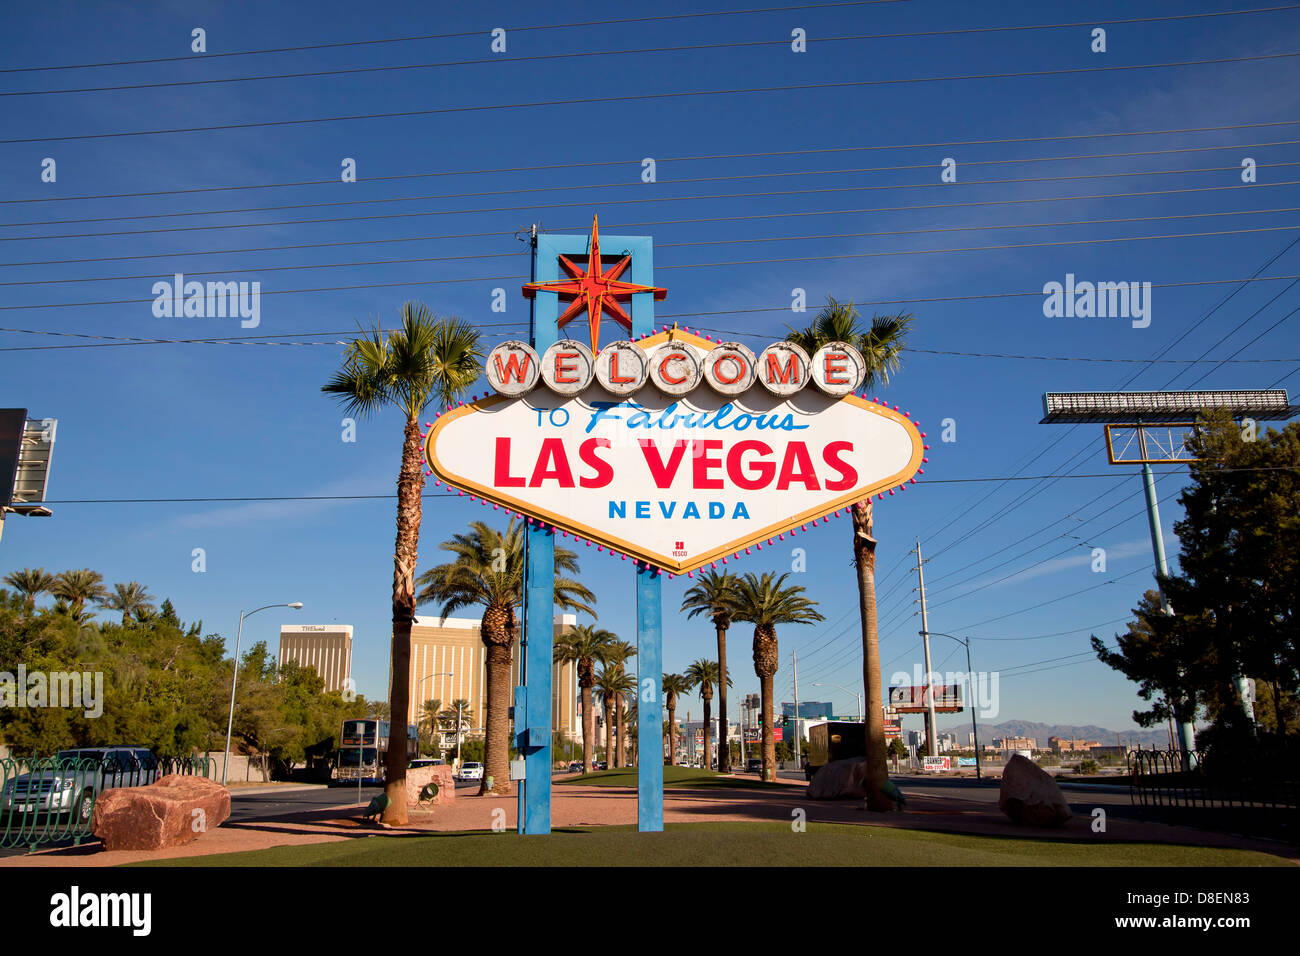 the famous sign Welcome to fabulous Las Vegas, Nevada in Las Vegas, Nevada, United States of America, USA Stock Photo